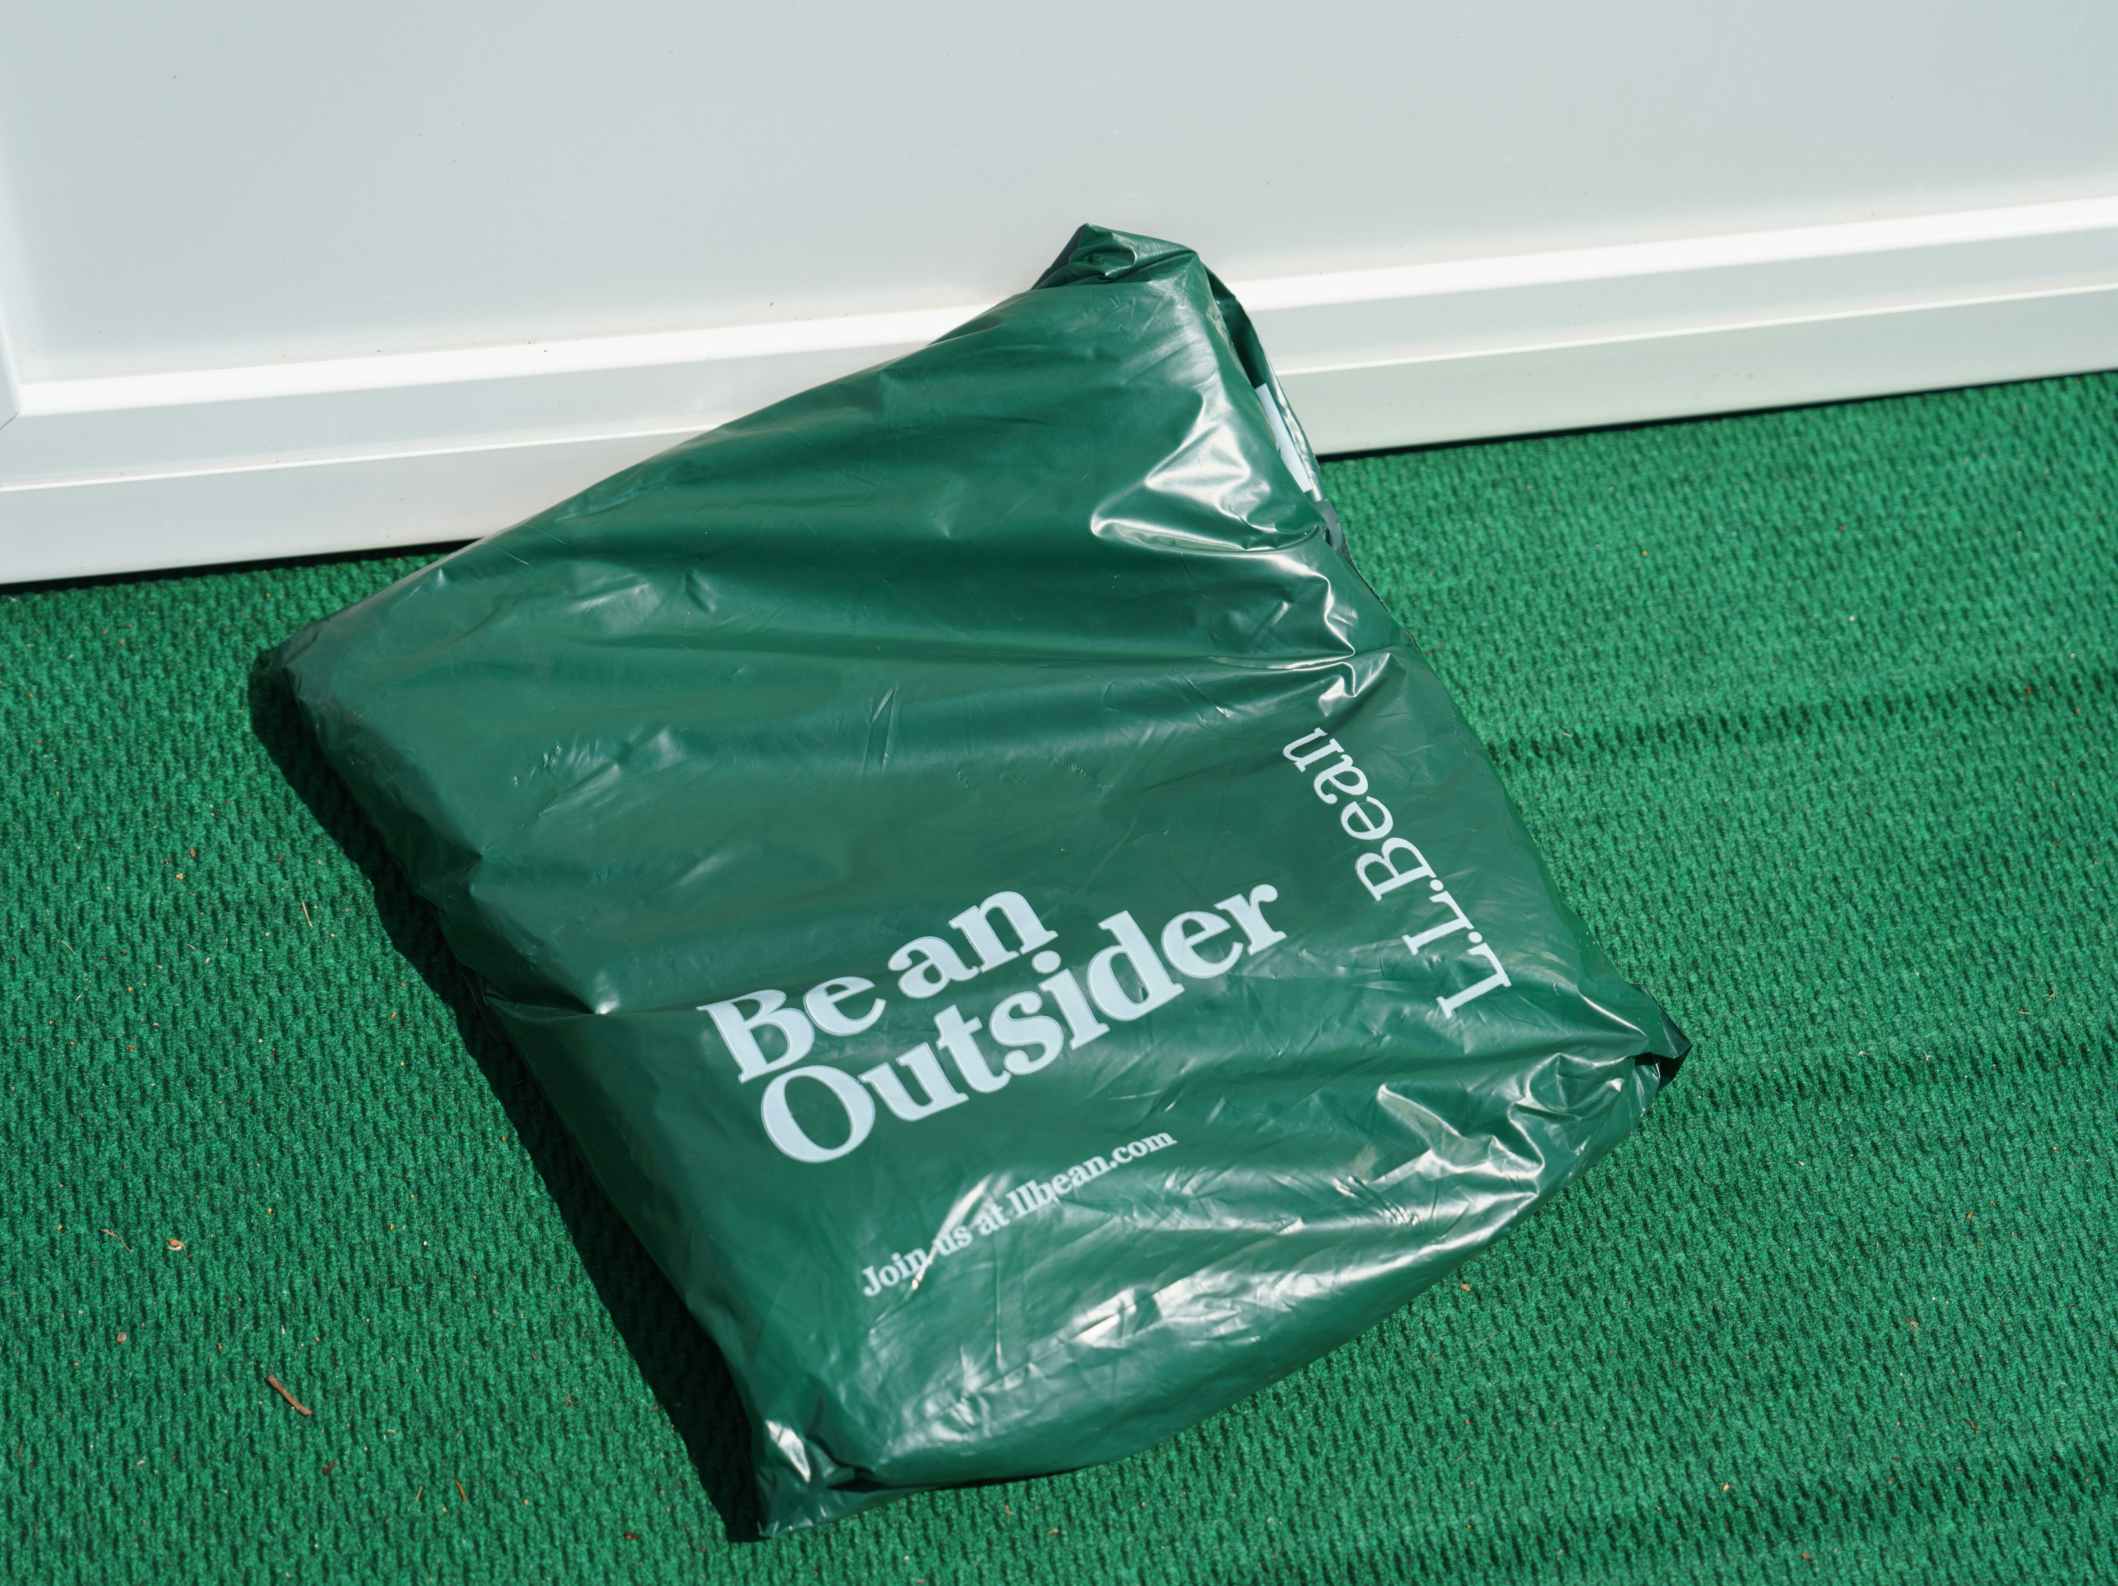 An LL Bean package sitting outside of a front door.